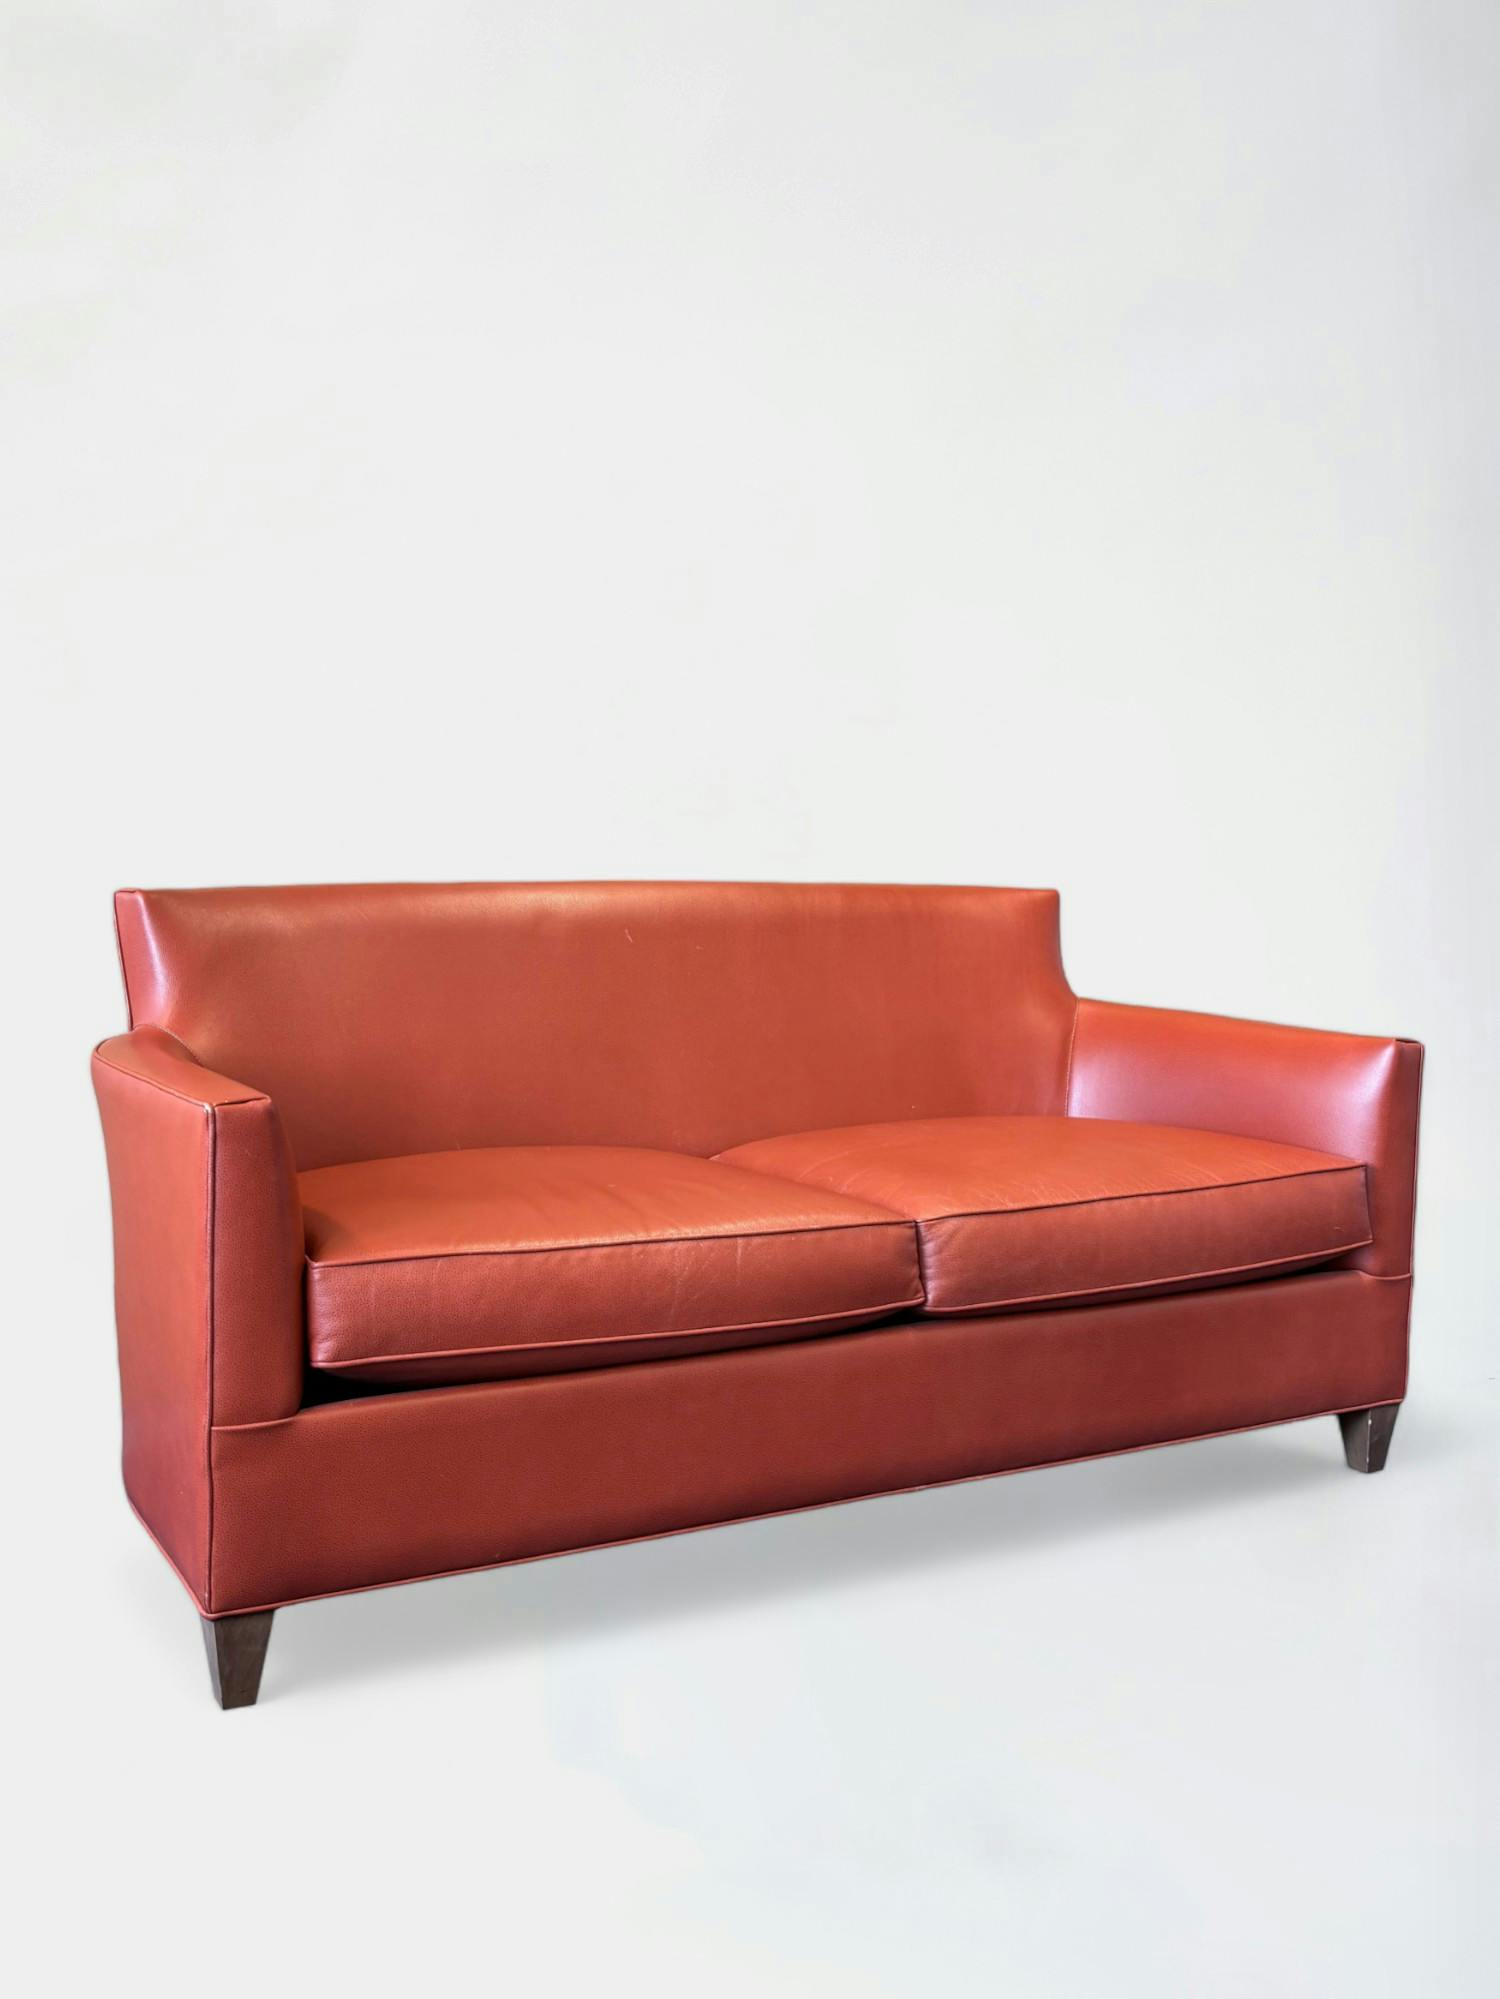 Red Leather Sofa with Streamlined Modern Design - Relieve Furniture